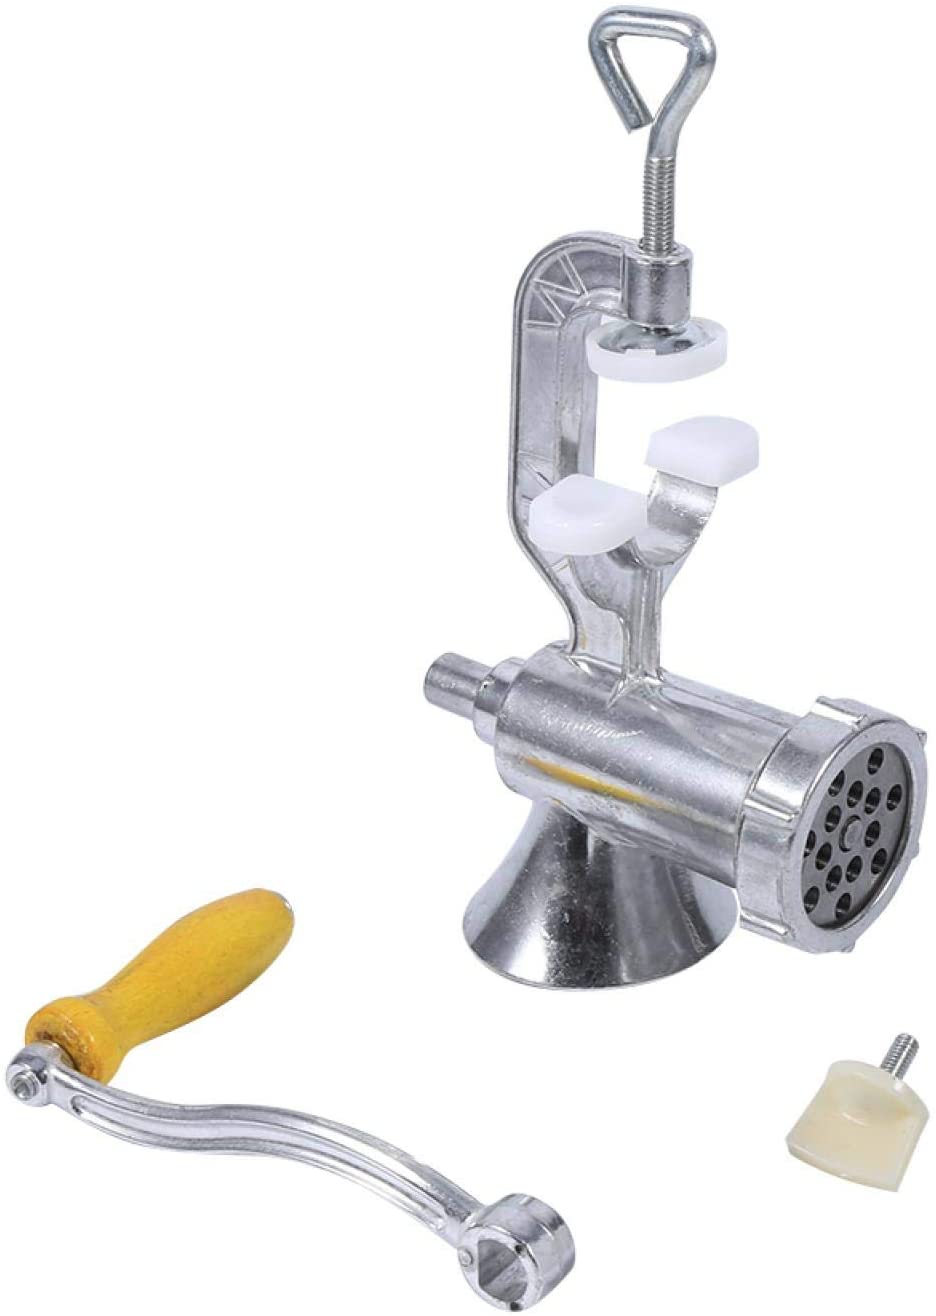 Fishlor Hand Meat Mincer, Aluminium Alloy Hand Operate Manual Mincer Sausage Mincer Table Kitchen Home Tool Mincer